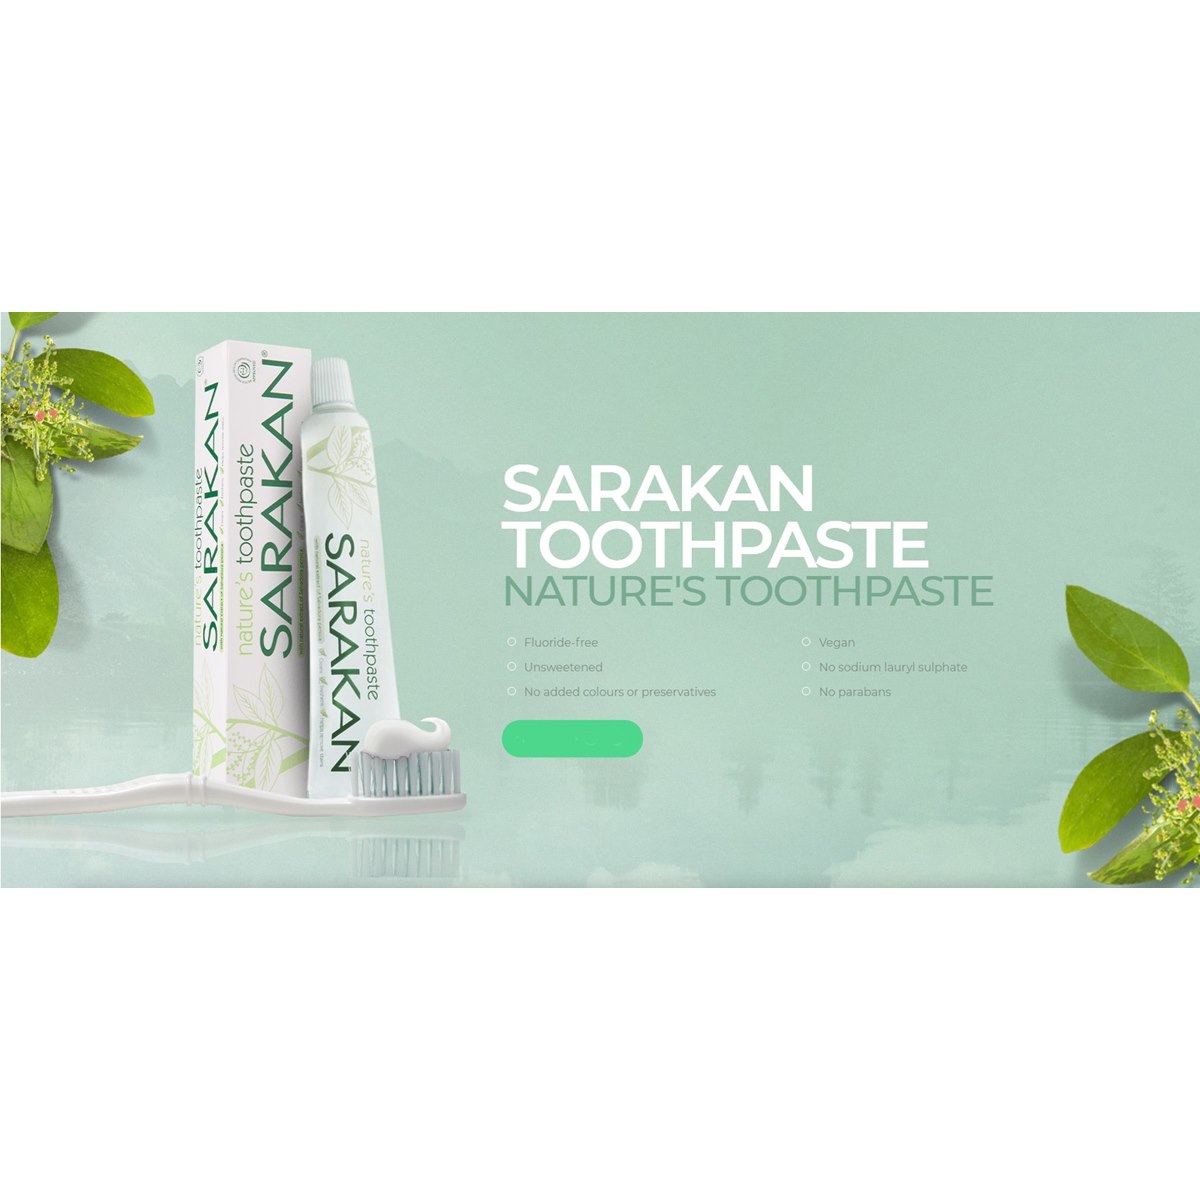 Where to Buy Sarakan Toothpaste Online